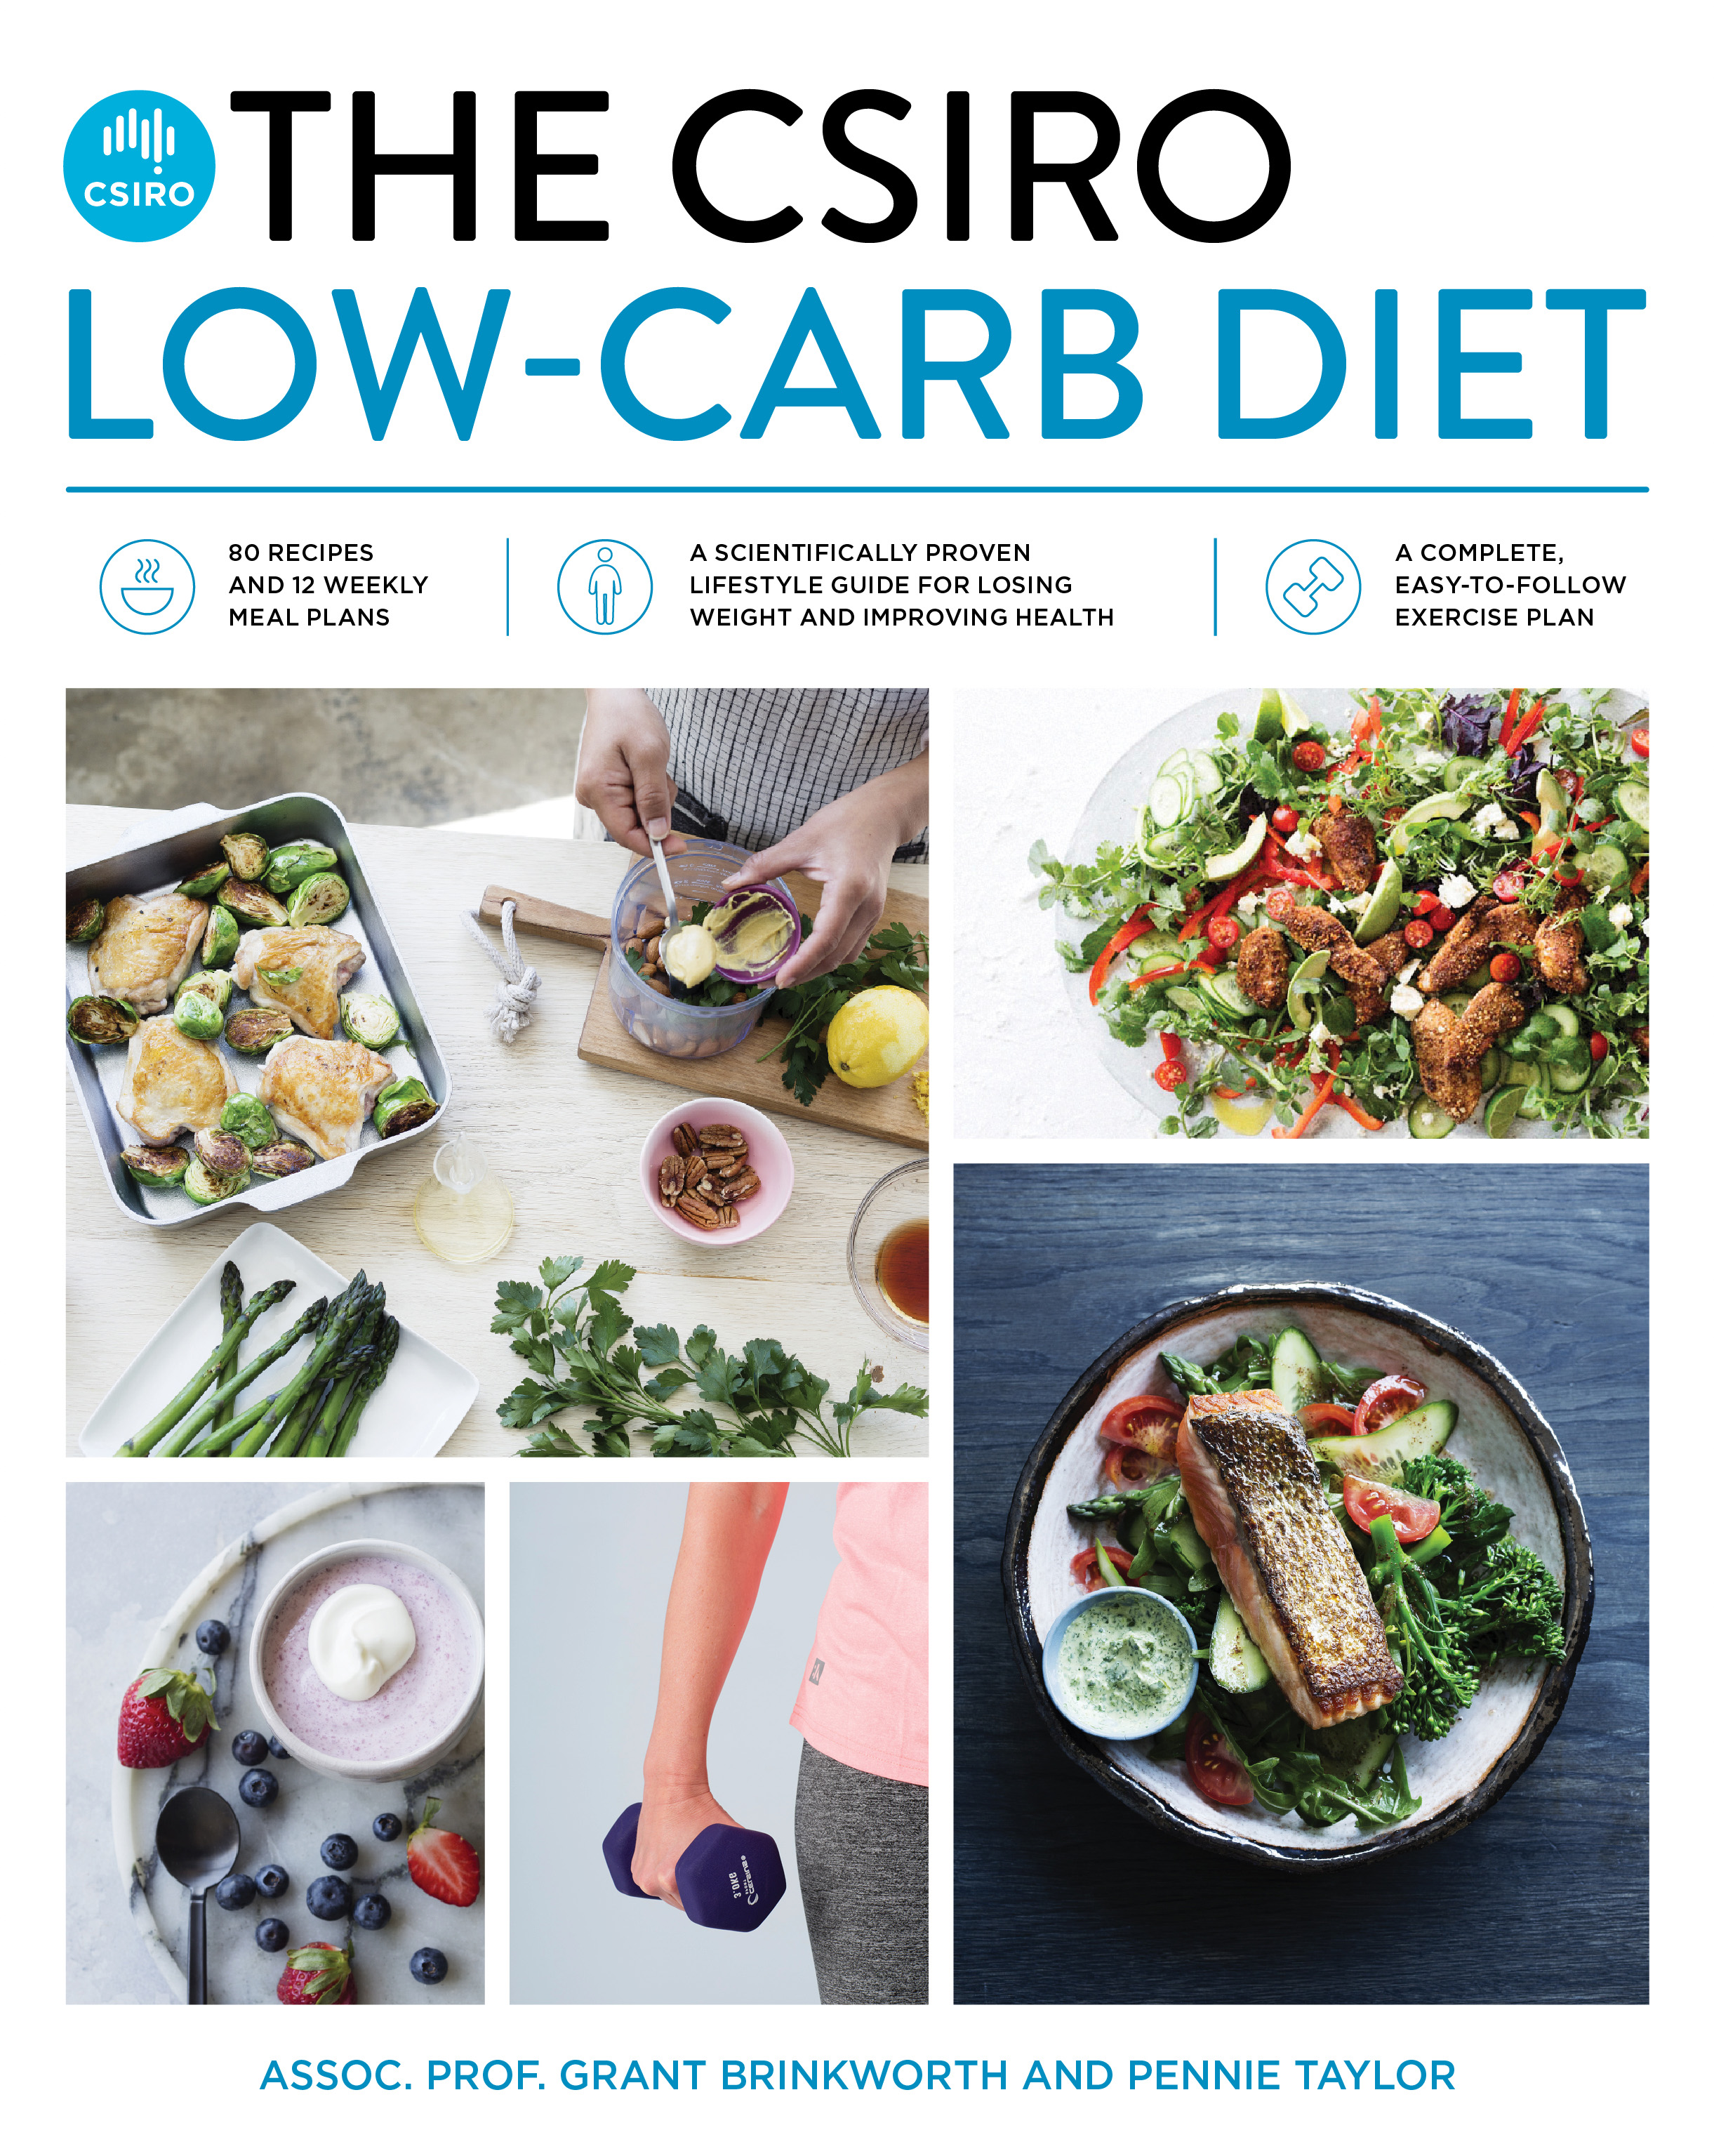 The CSIRO Low Carb Diet book cover